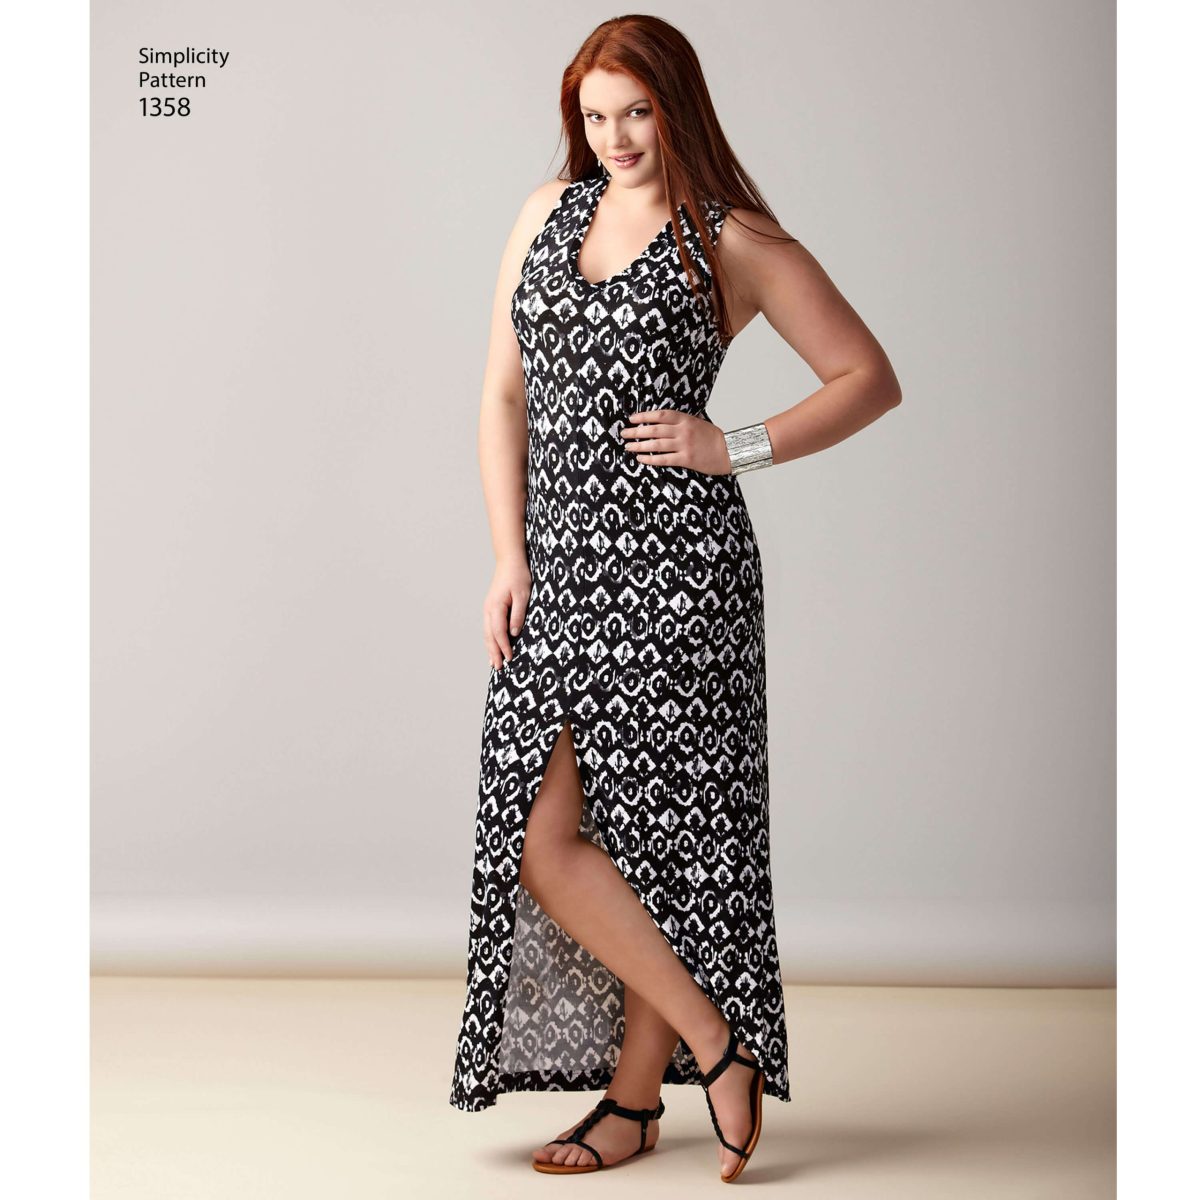 Simplicity Sewing Pattern 1358 Misses' Knit Dresses with Length and Neckline Variations